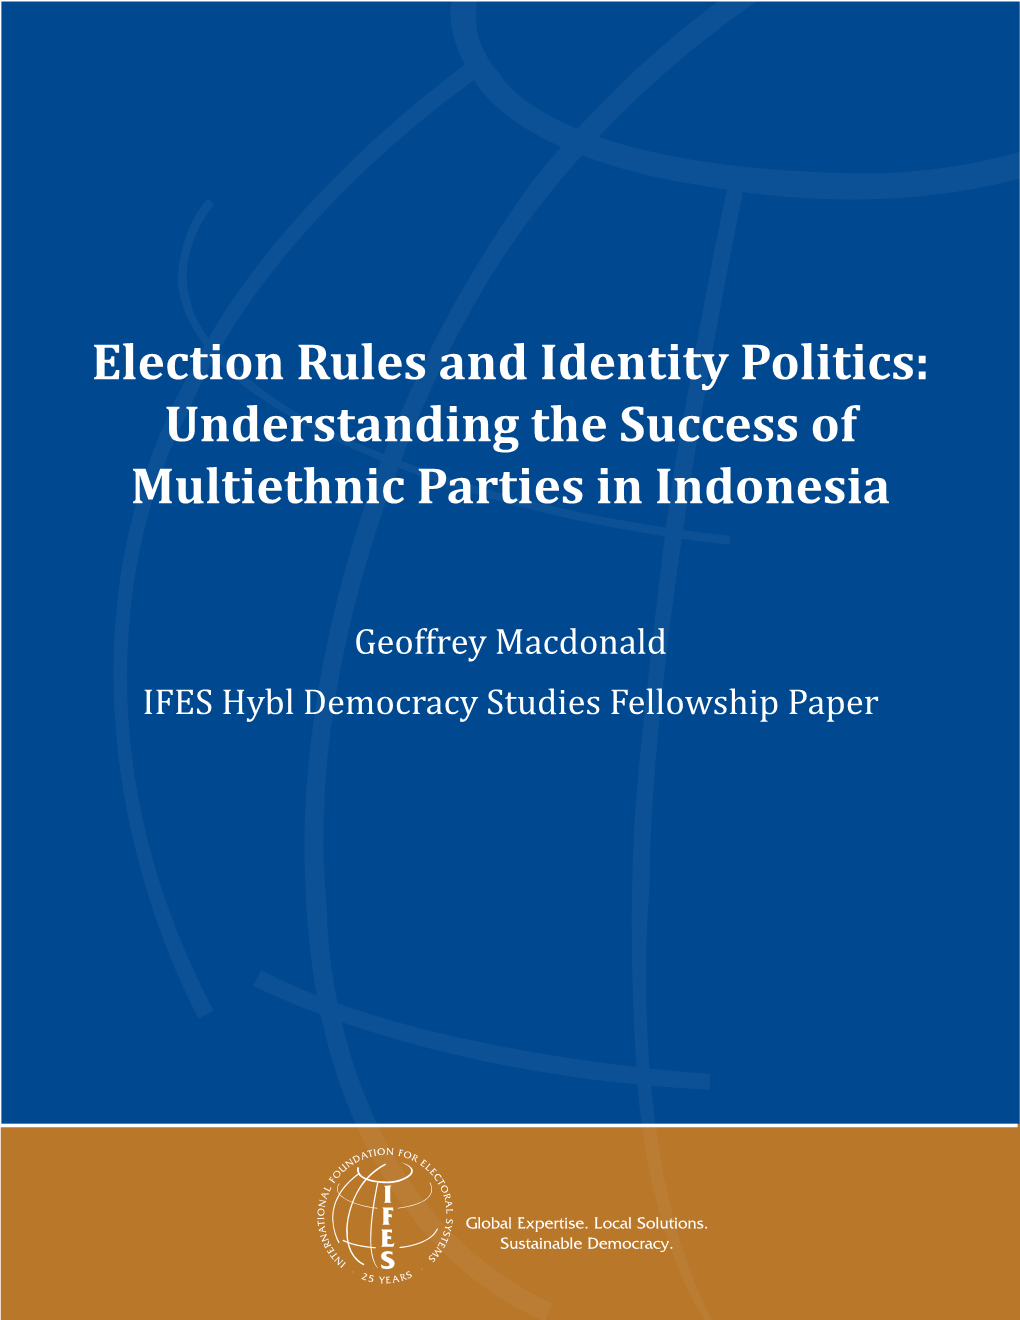 Election Rules and Identity Politics: Understanding the Success of Multiethnic Parties in Indonesia